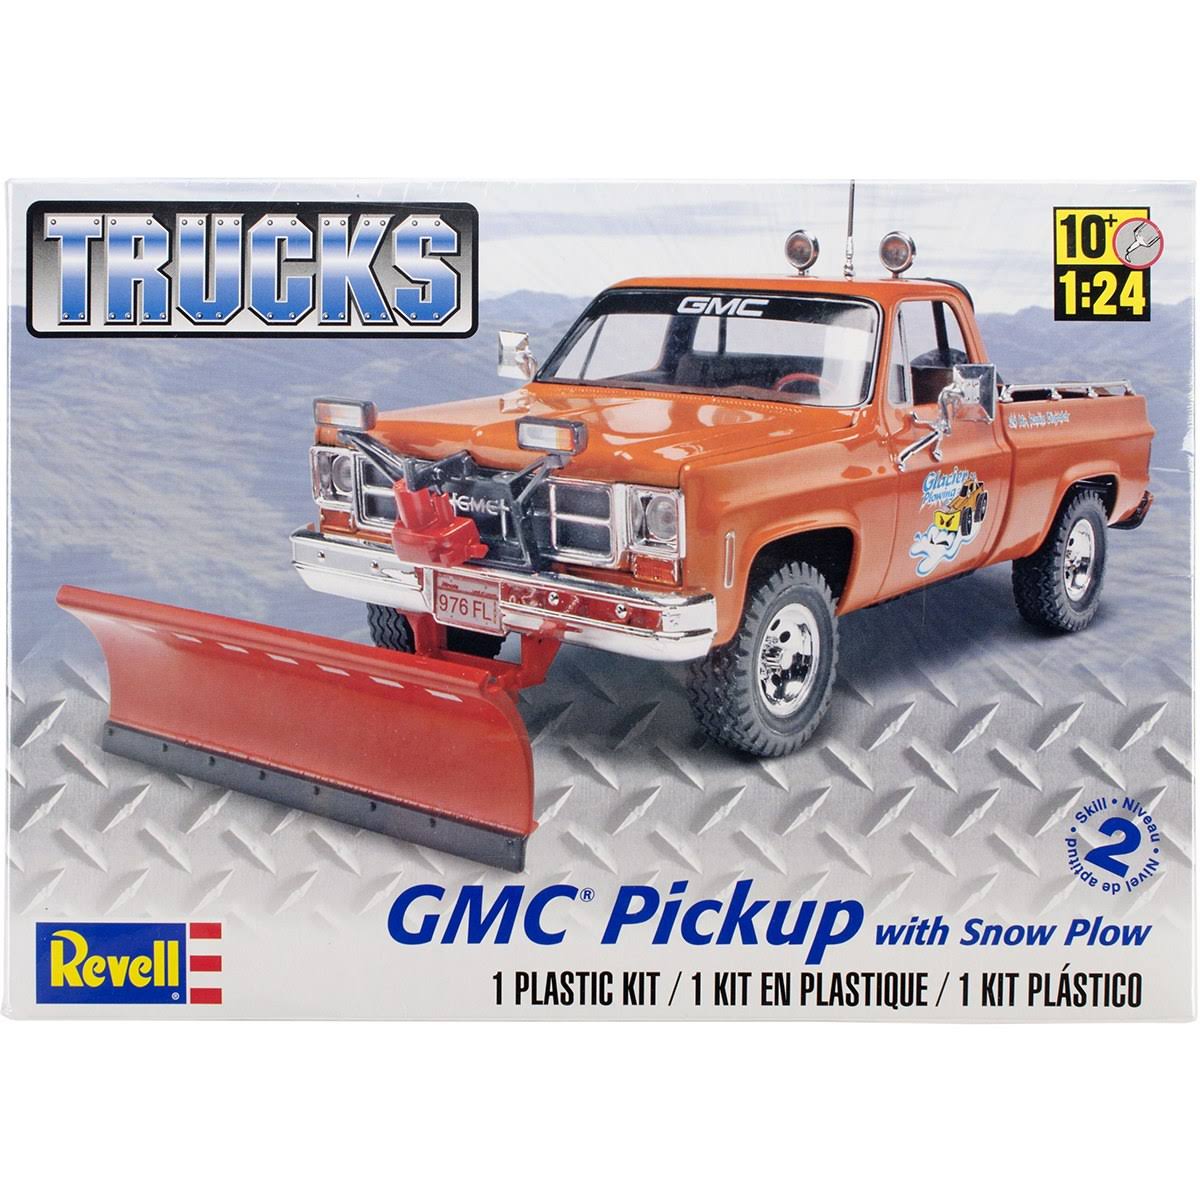 Revell Monogram Gmc Pickup with Snow Plow Model Kit - 1:24 Scale